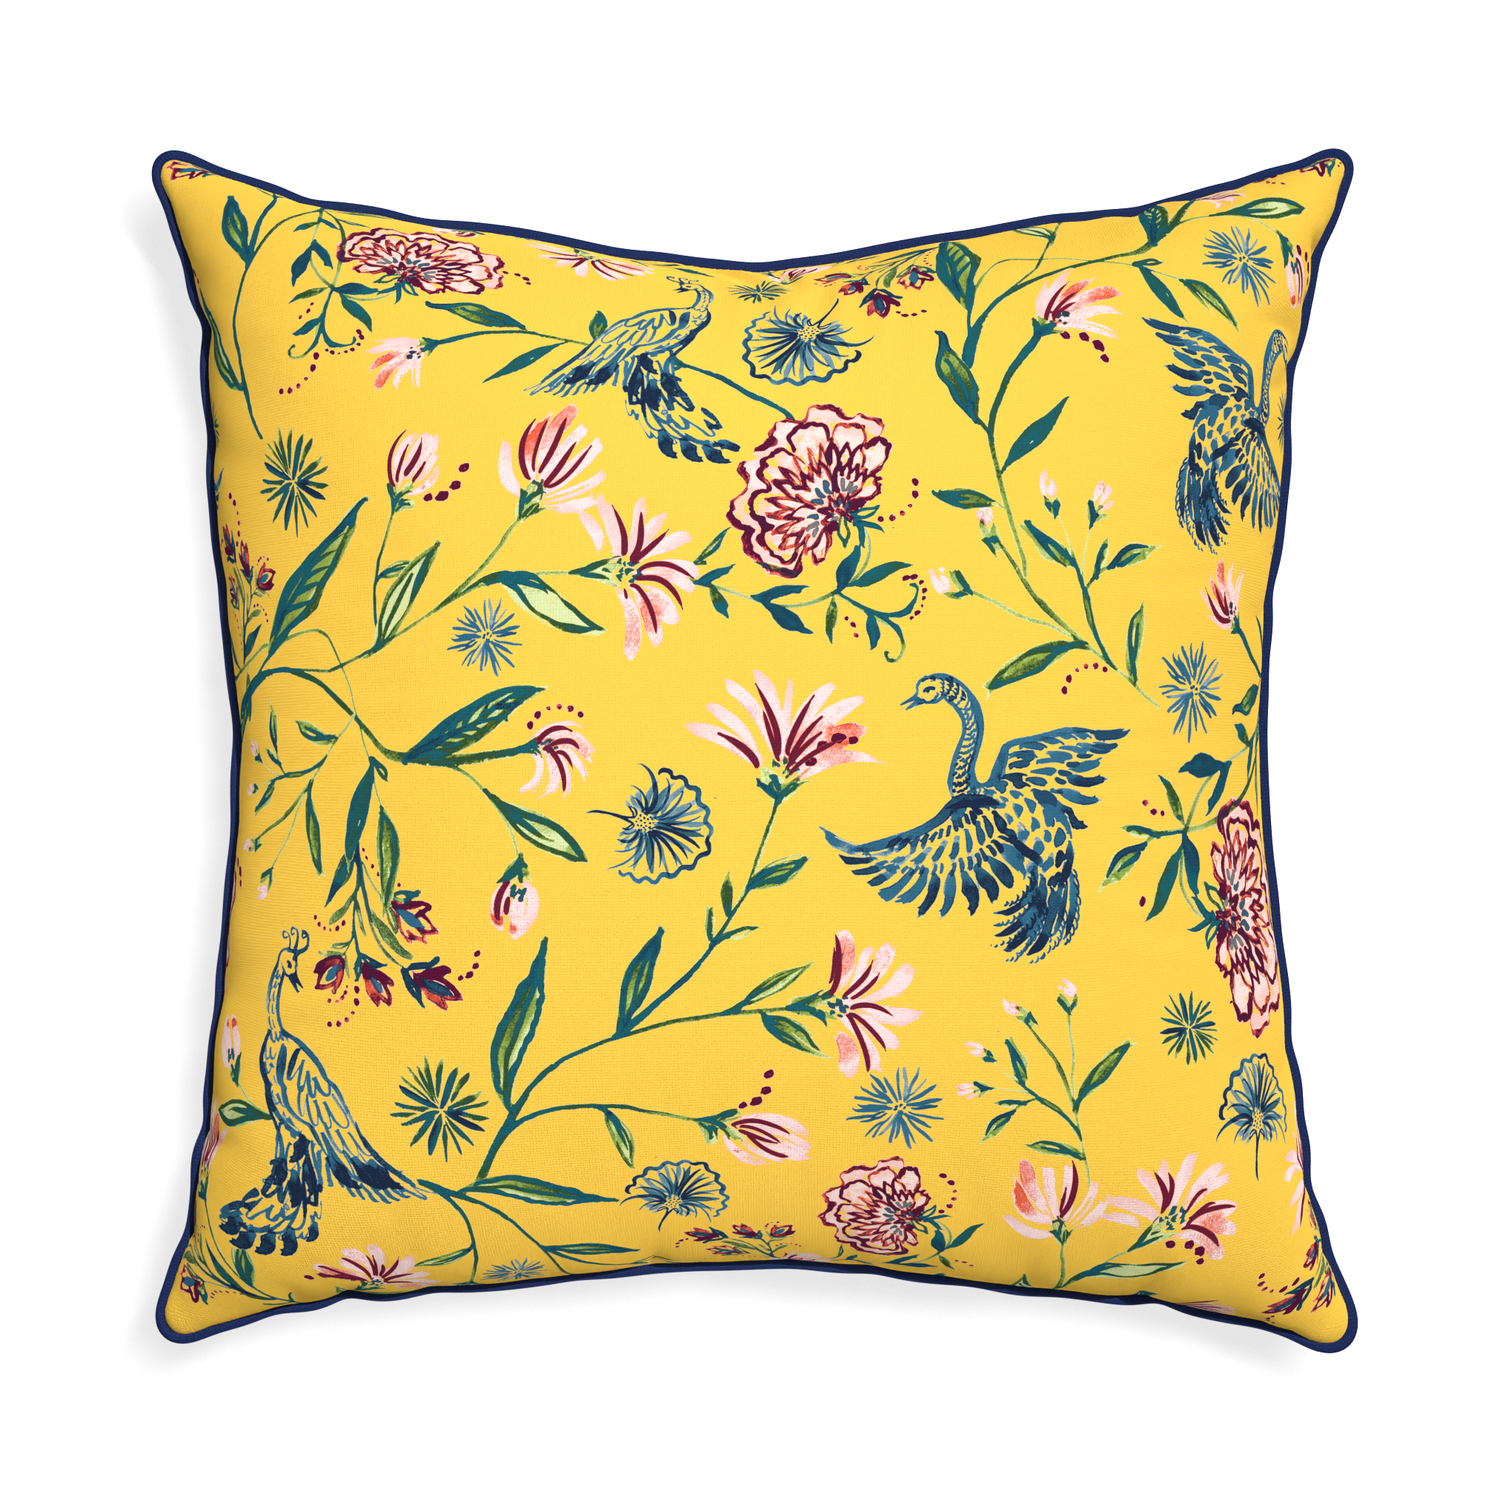 Euro-sham daphne canary custom pillow with midnight piping on white background